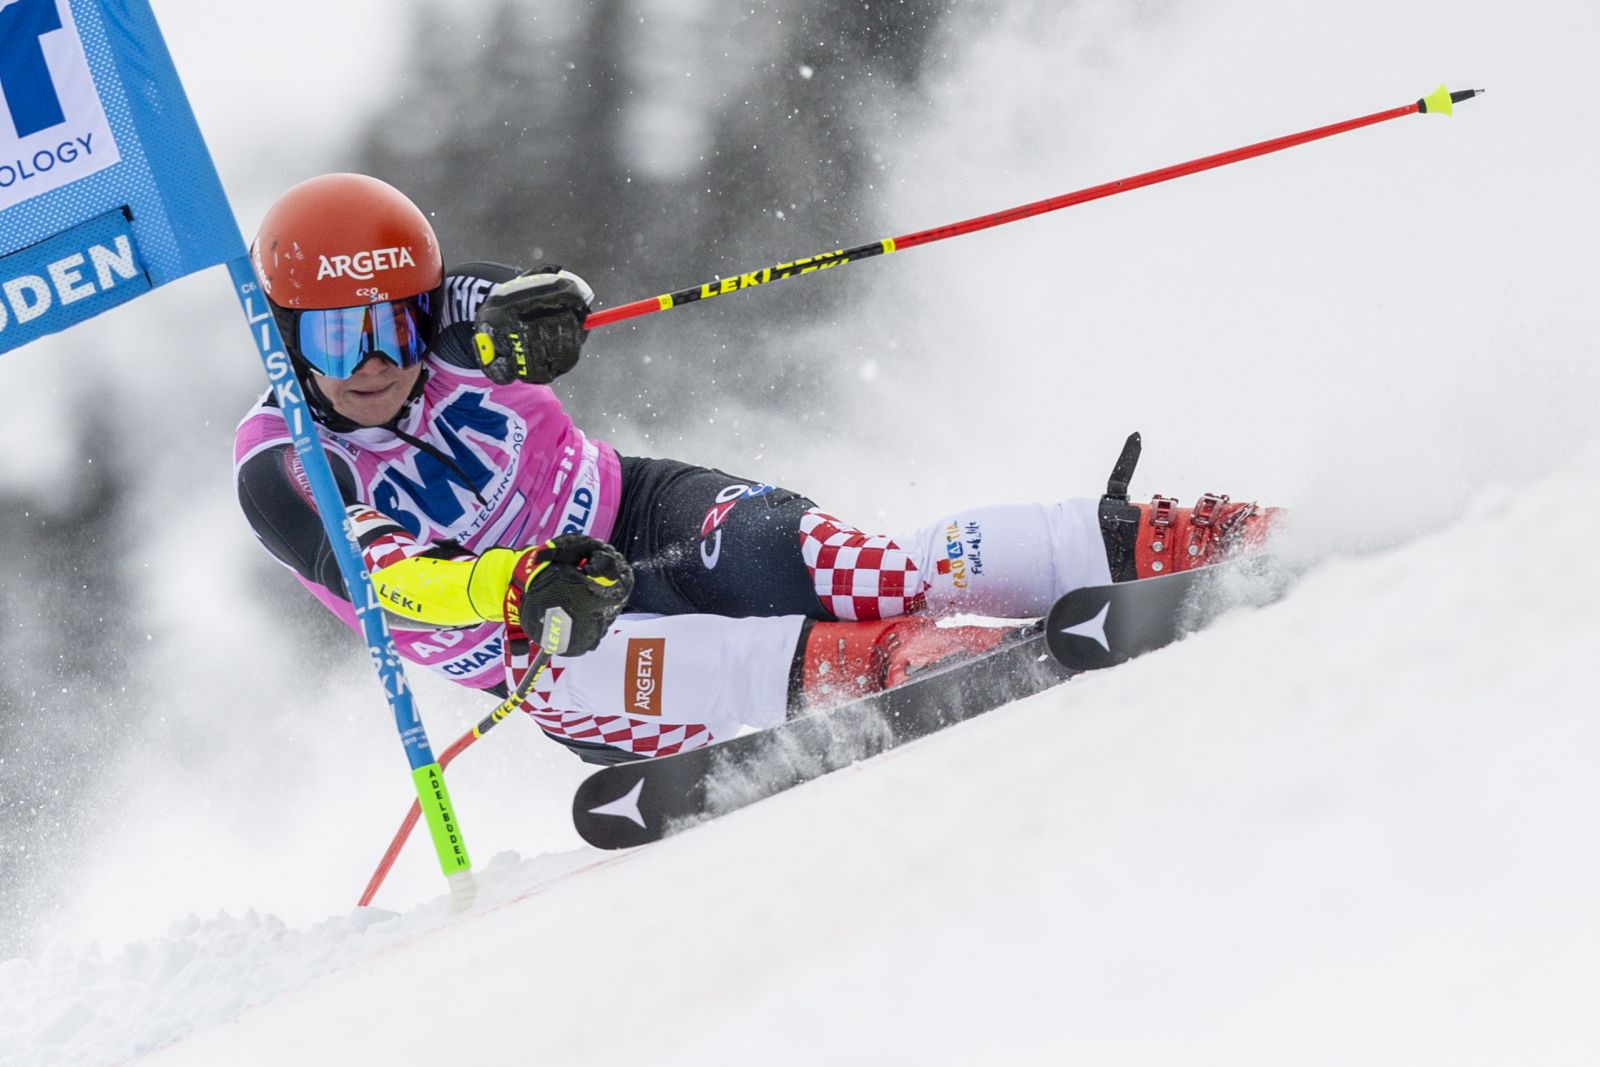 epa09672939 Filip Zubcic of Croatia in action in action during the first run of the men's giant slalom race at the Alpine Skiing FIS Ski World Cup in Adelboden, Switzerland, 08 January 2022.  EPA/ANTHONY ANEX